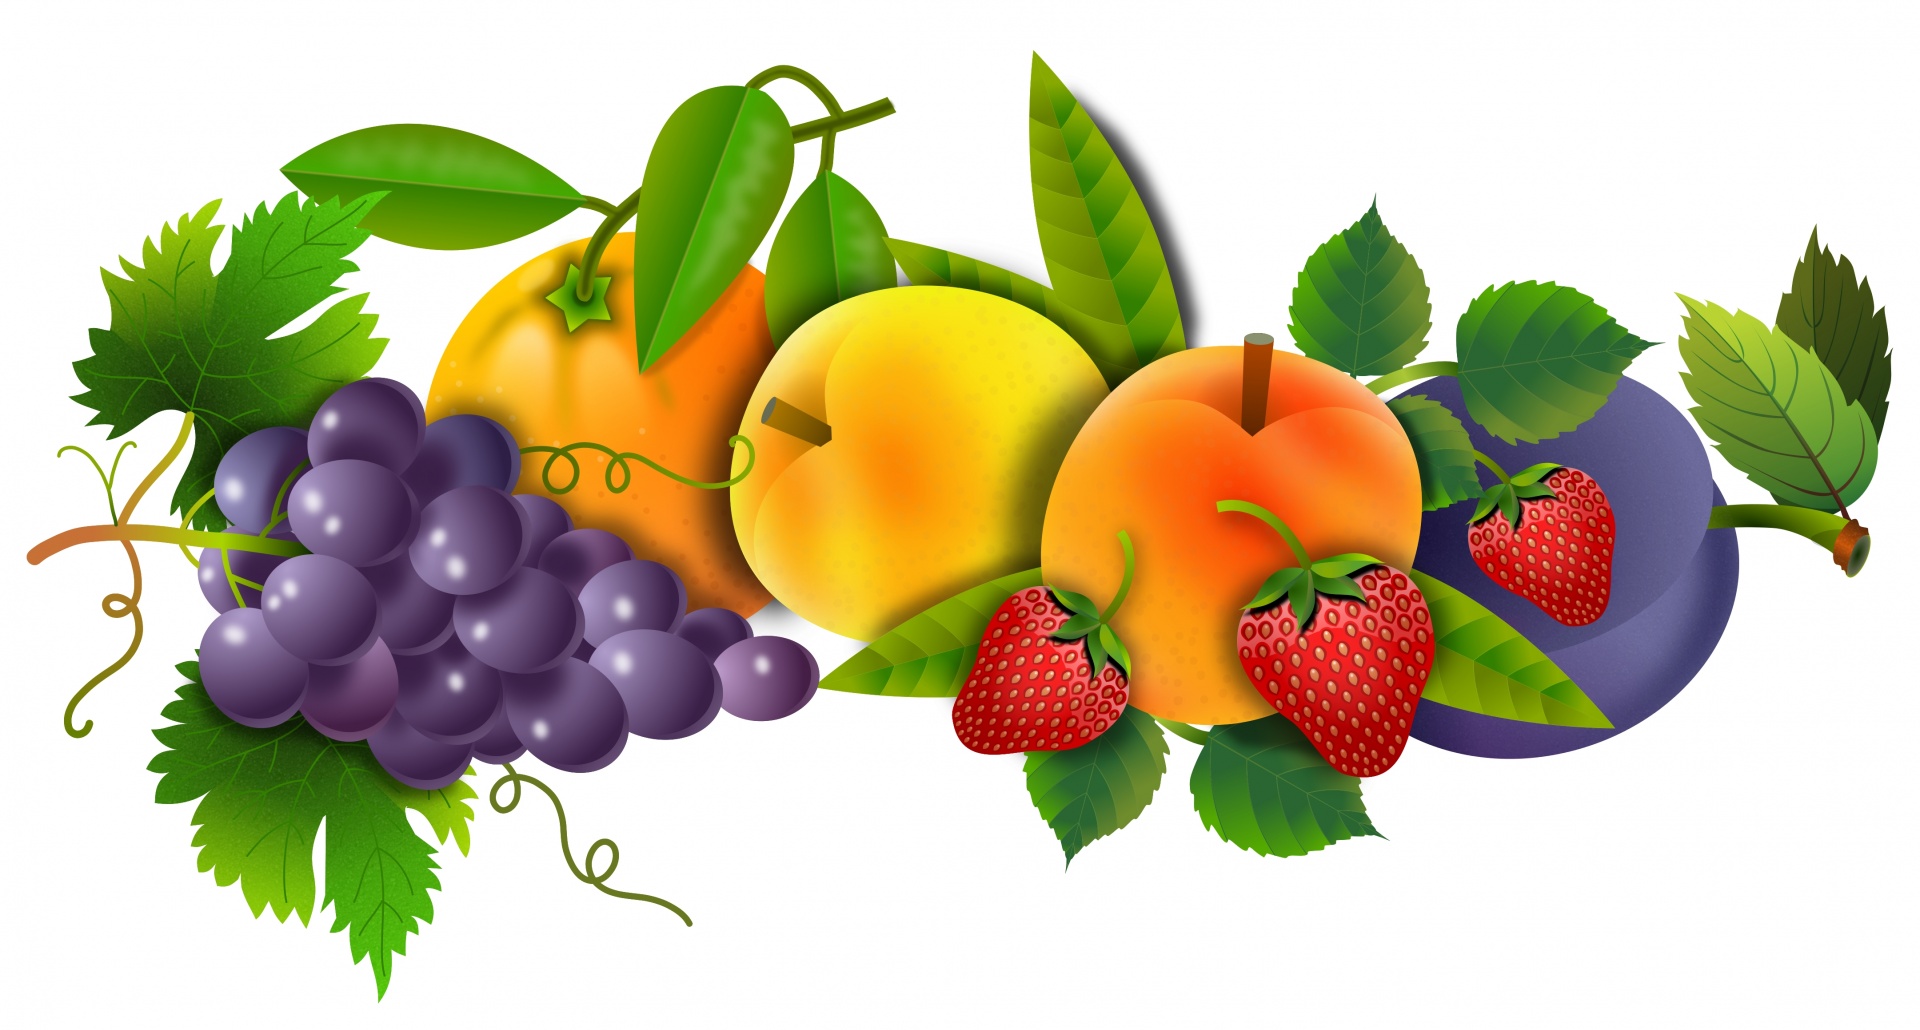 Fruits Group